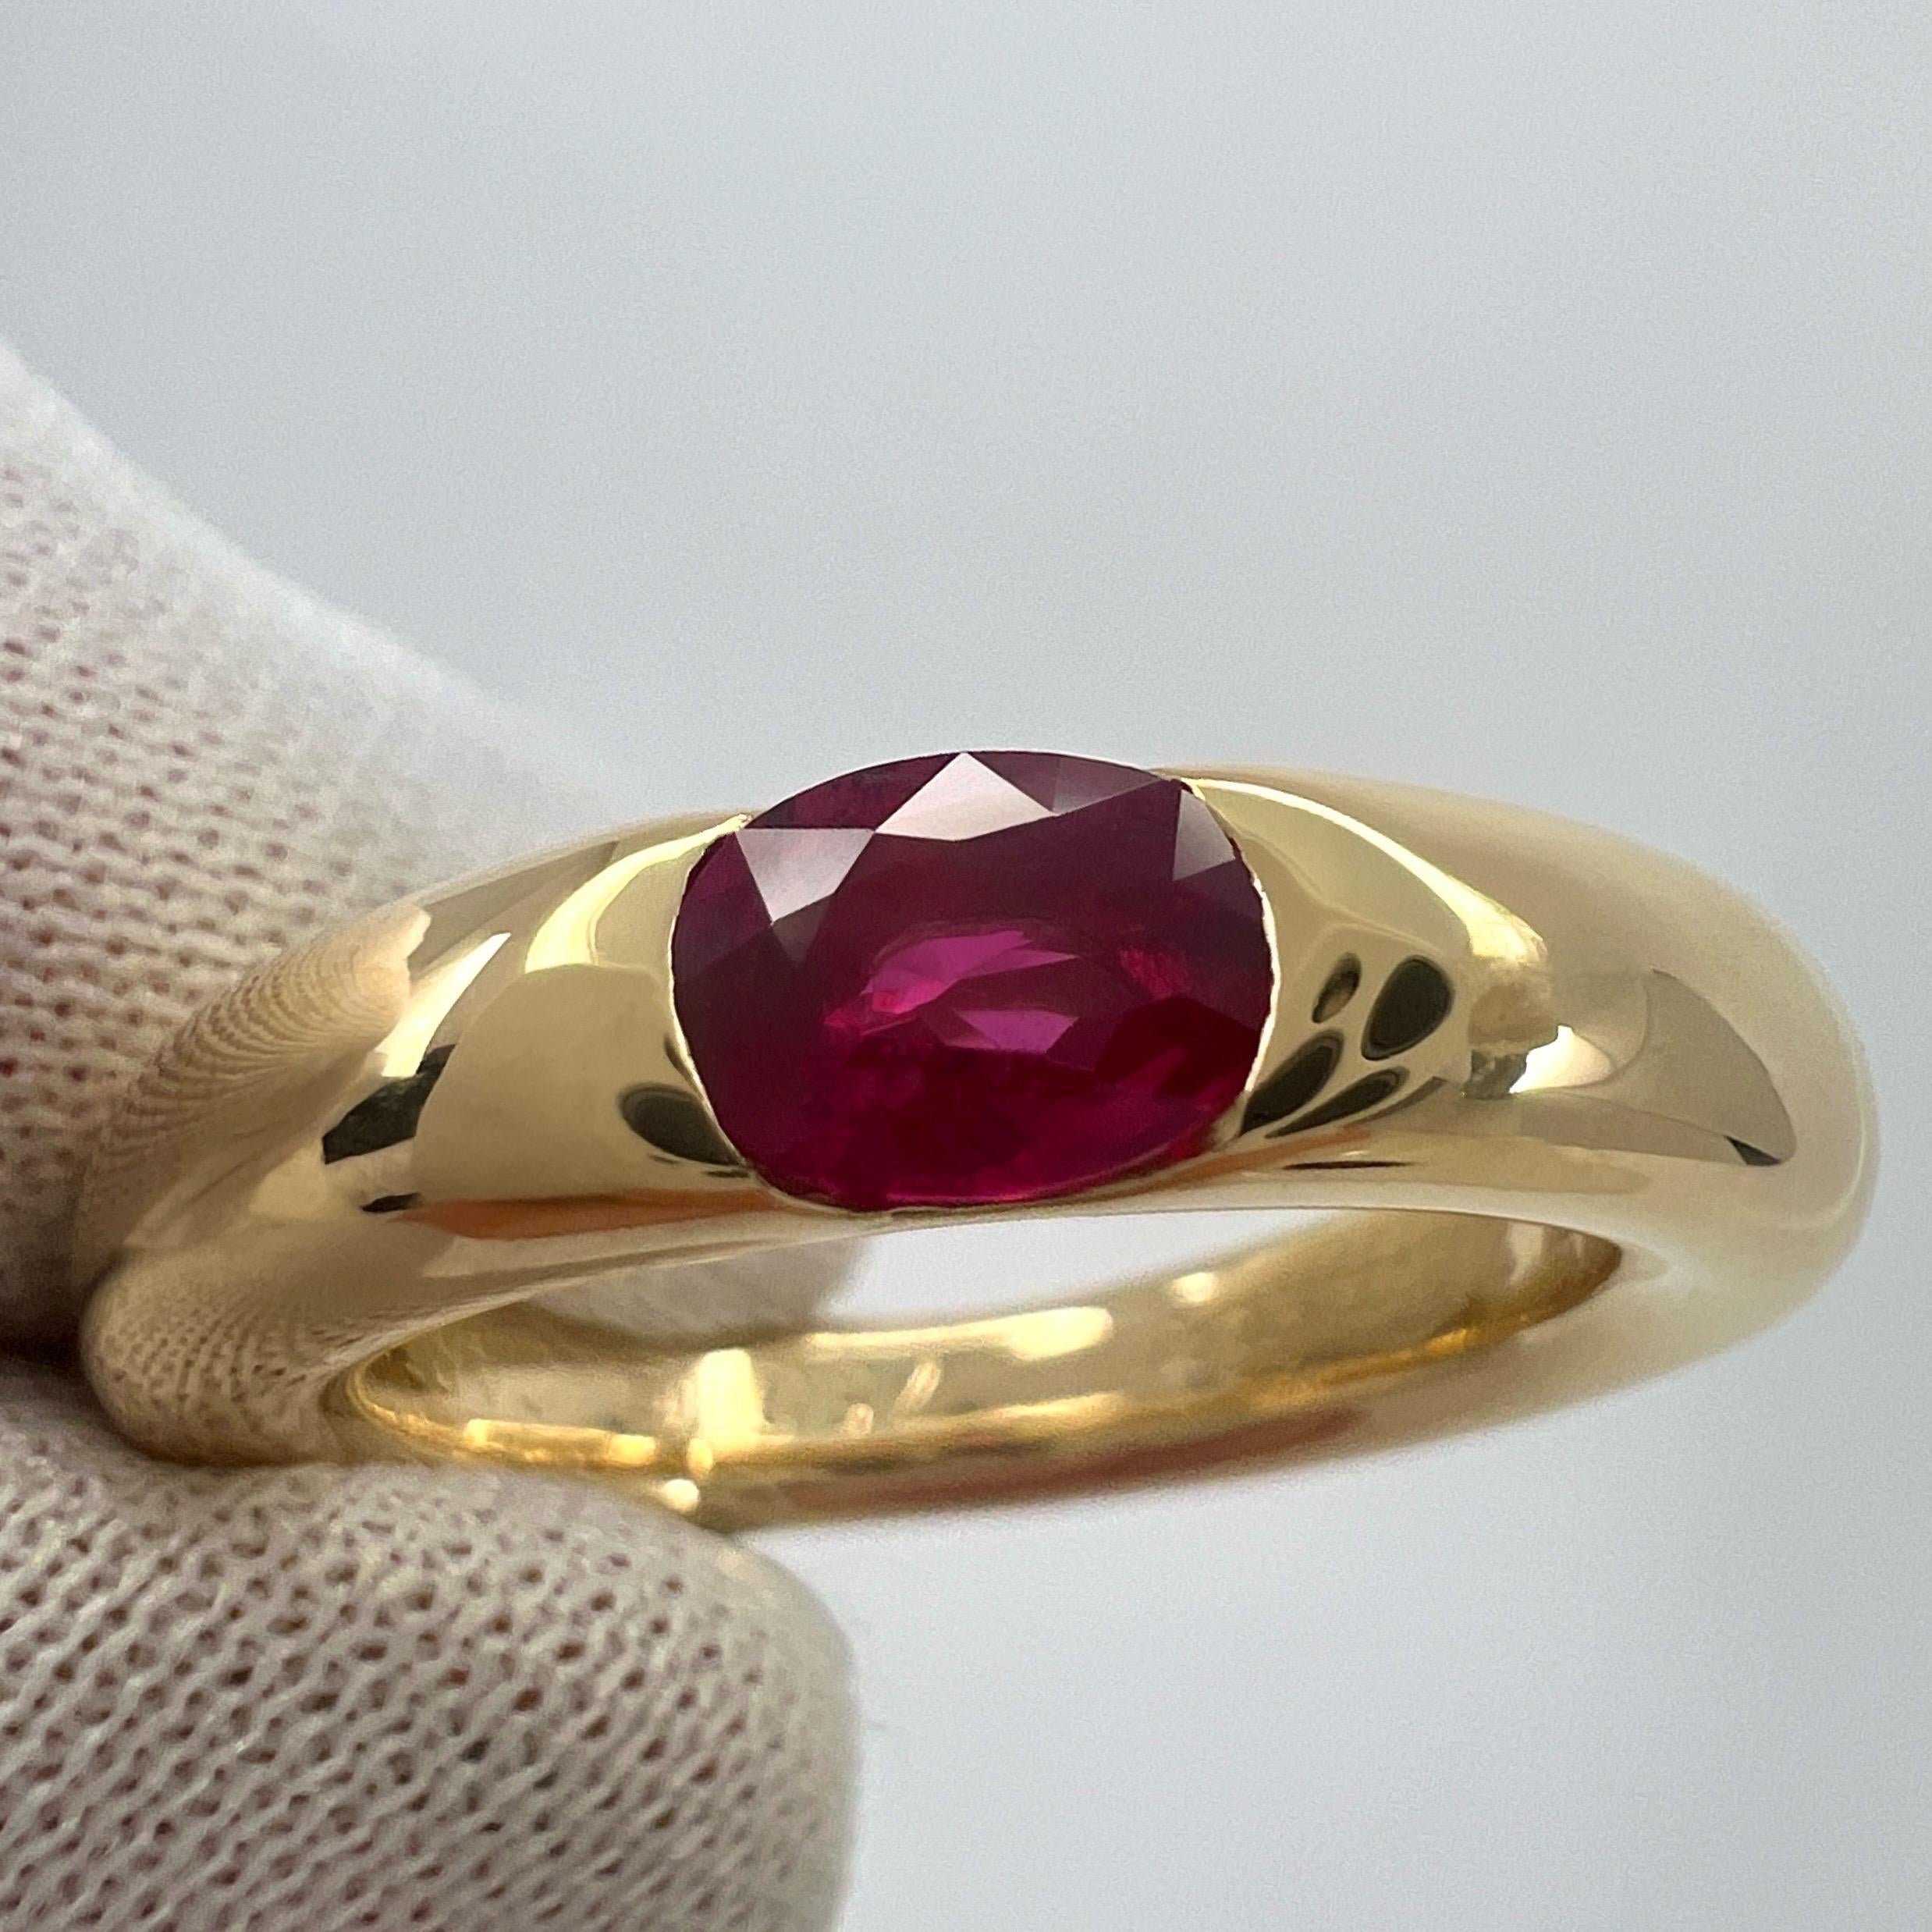 Vintage Cartier Vivid Red Ruby Ellipse 18k Yellow Gold Oval Cut Solitaire Ring 5